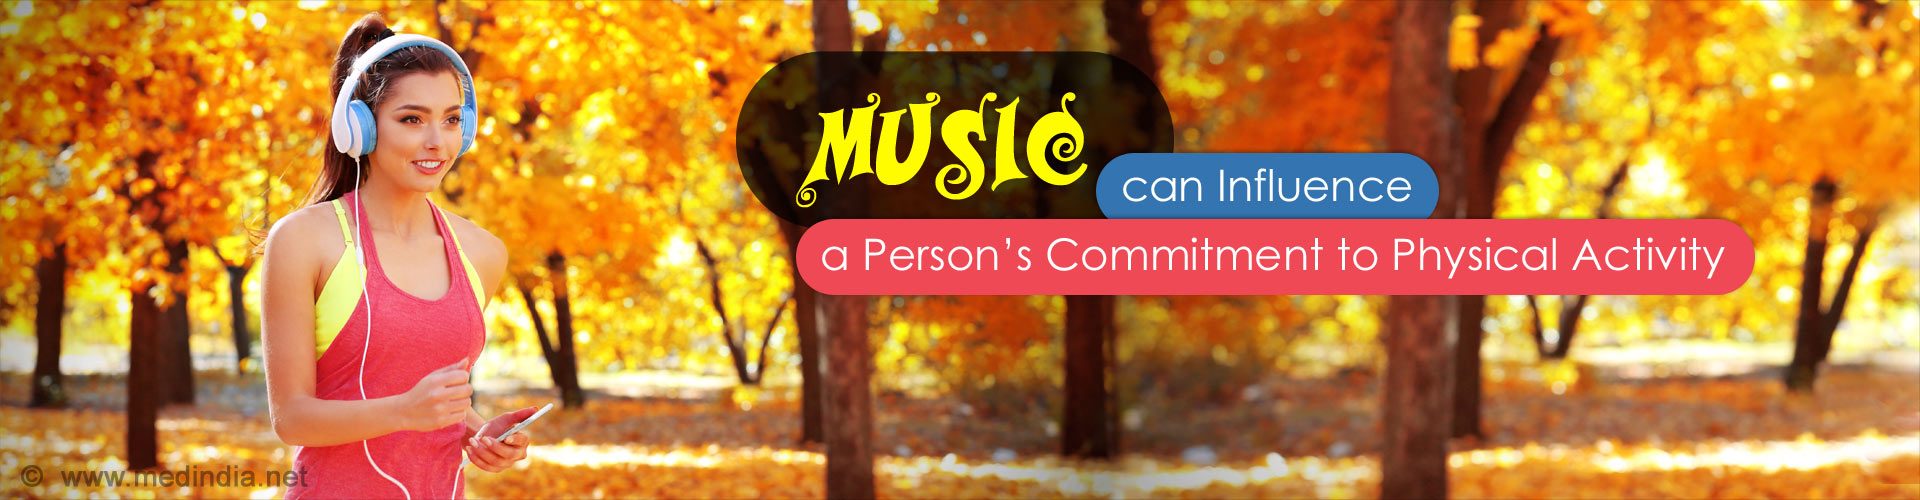 Music Can Influence A Person's Commitment to Physical Activity